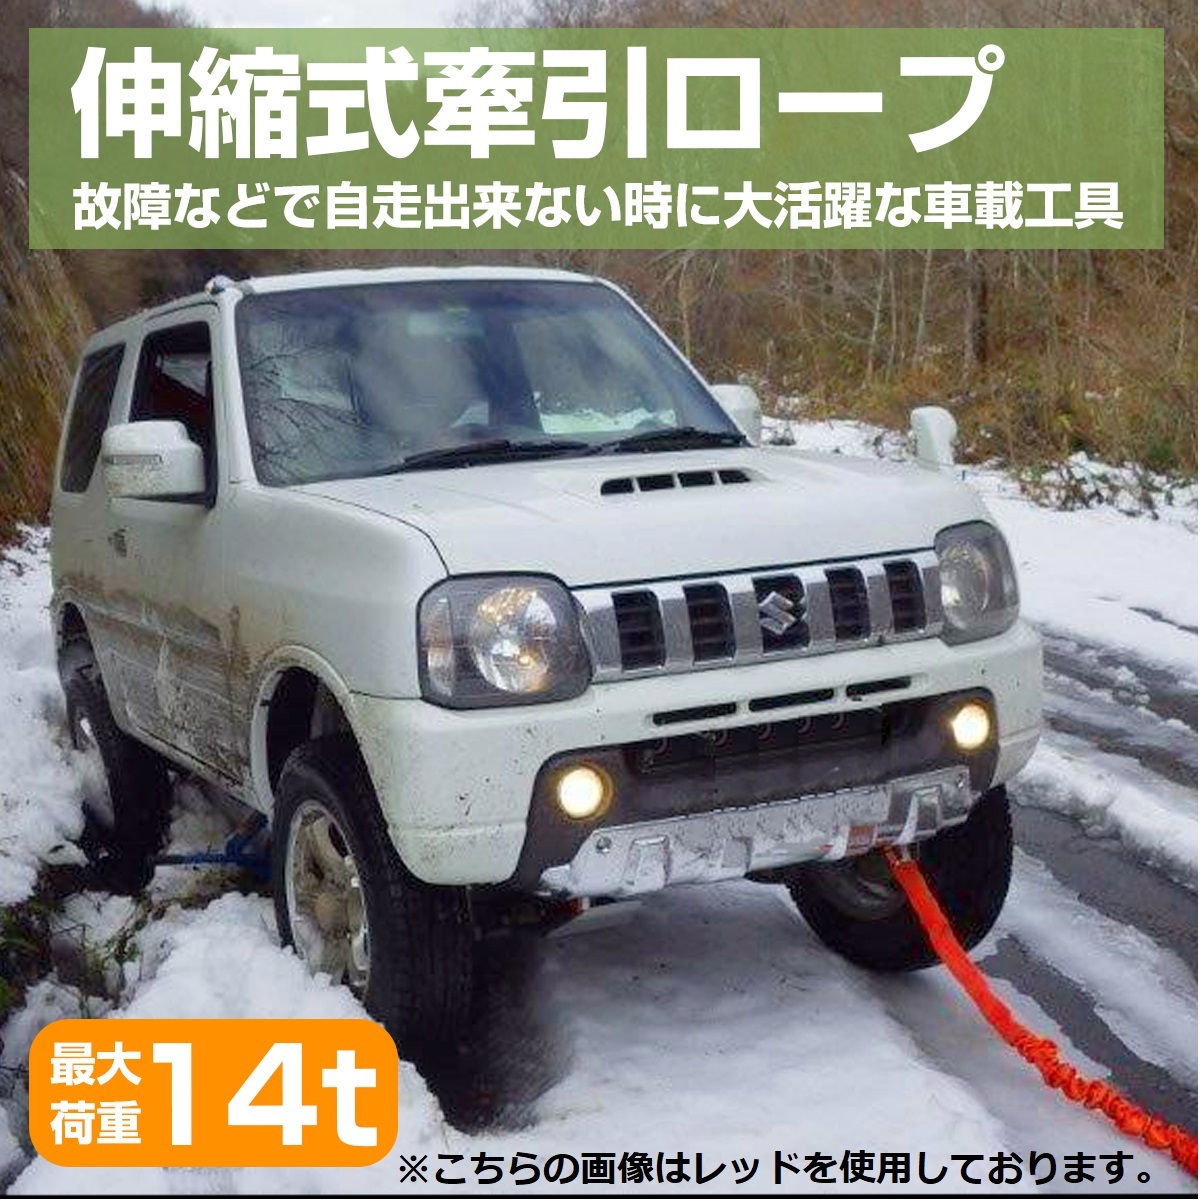  traction ... rope 14t flexible type 3.5m hook attaching 4WD 4WD Jeep Wrangler Jimny snow mud road off-road vehicle off-road s tuck color all 8 color 